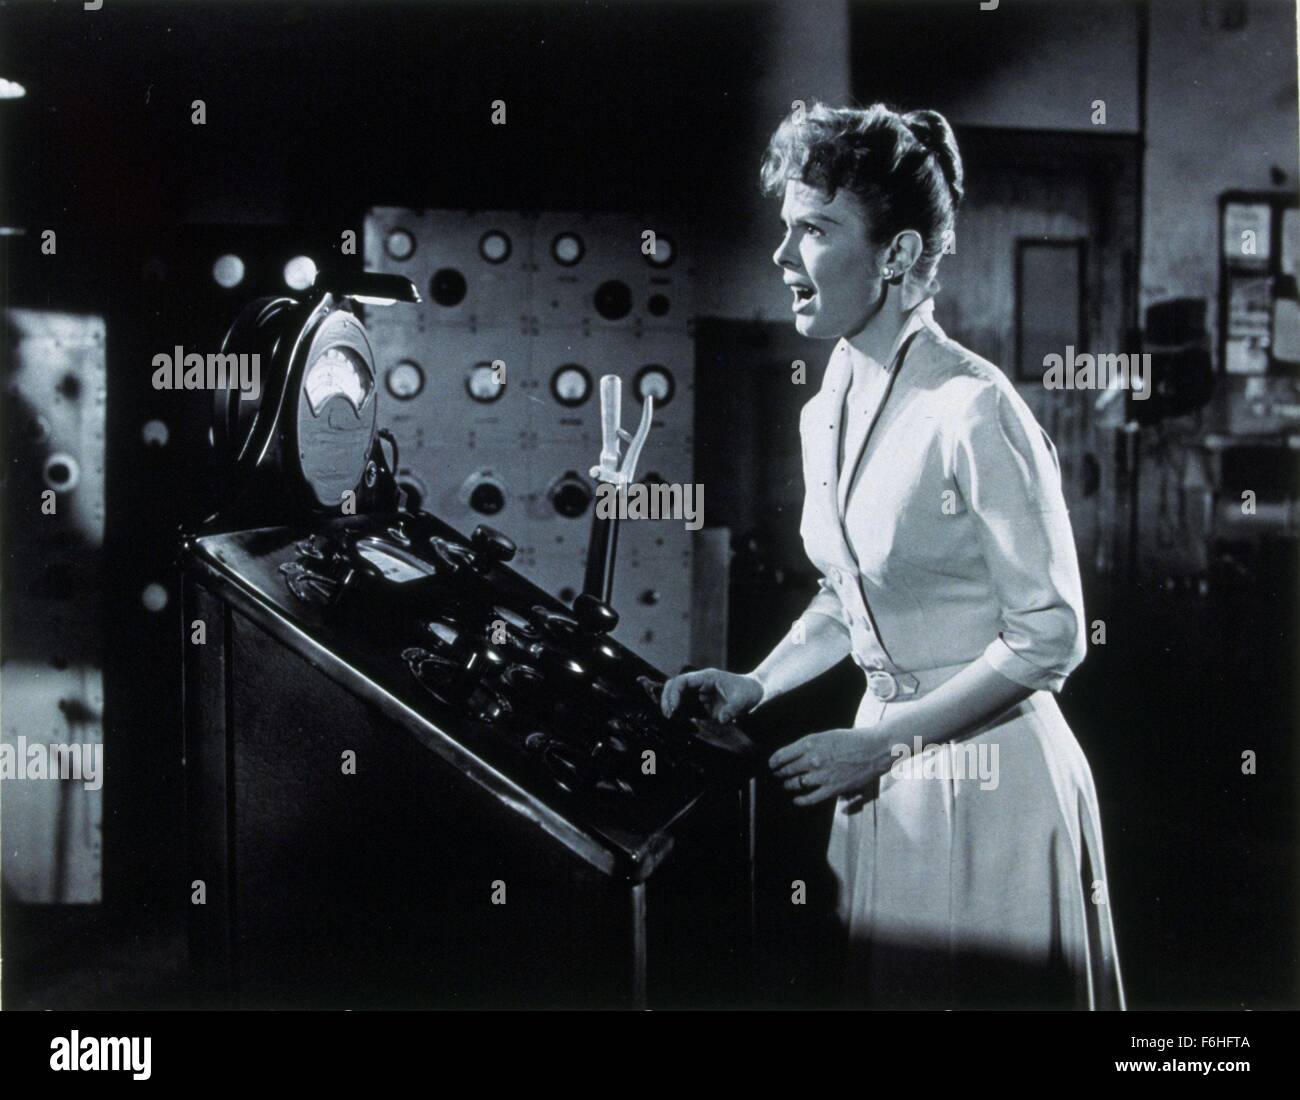 1958, Film Title: FLY, Director: KURT NEUMANN, Studio: FOX, Pictured: SCI-FI, HORROR, SCIENTIFIC, SCIENCE, AGHAST, 1958, PATRICIA OWENS, SCREAMING, ITS & ALIENS! THINGS, DISGUSTED, UPSET, AFRAID, CONTROLS, MACHINERY. (Credit Image: SNAP) Stock Photo